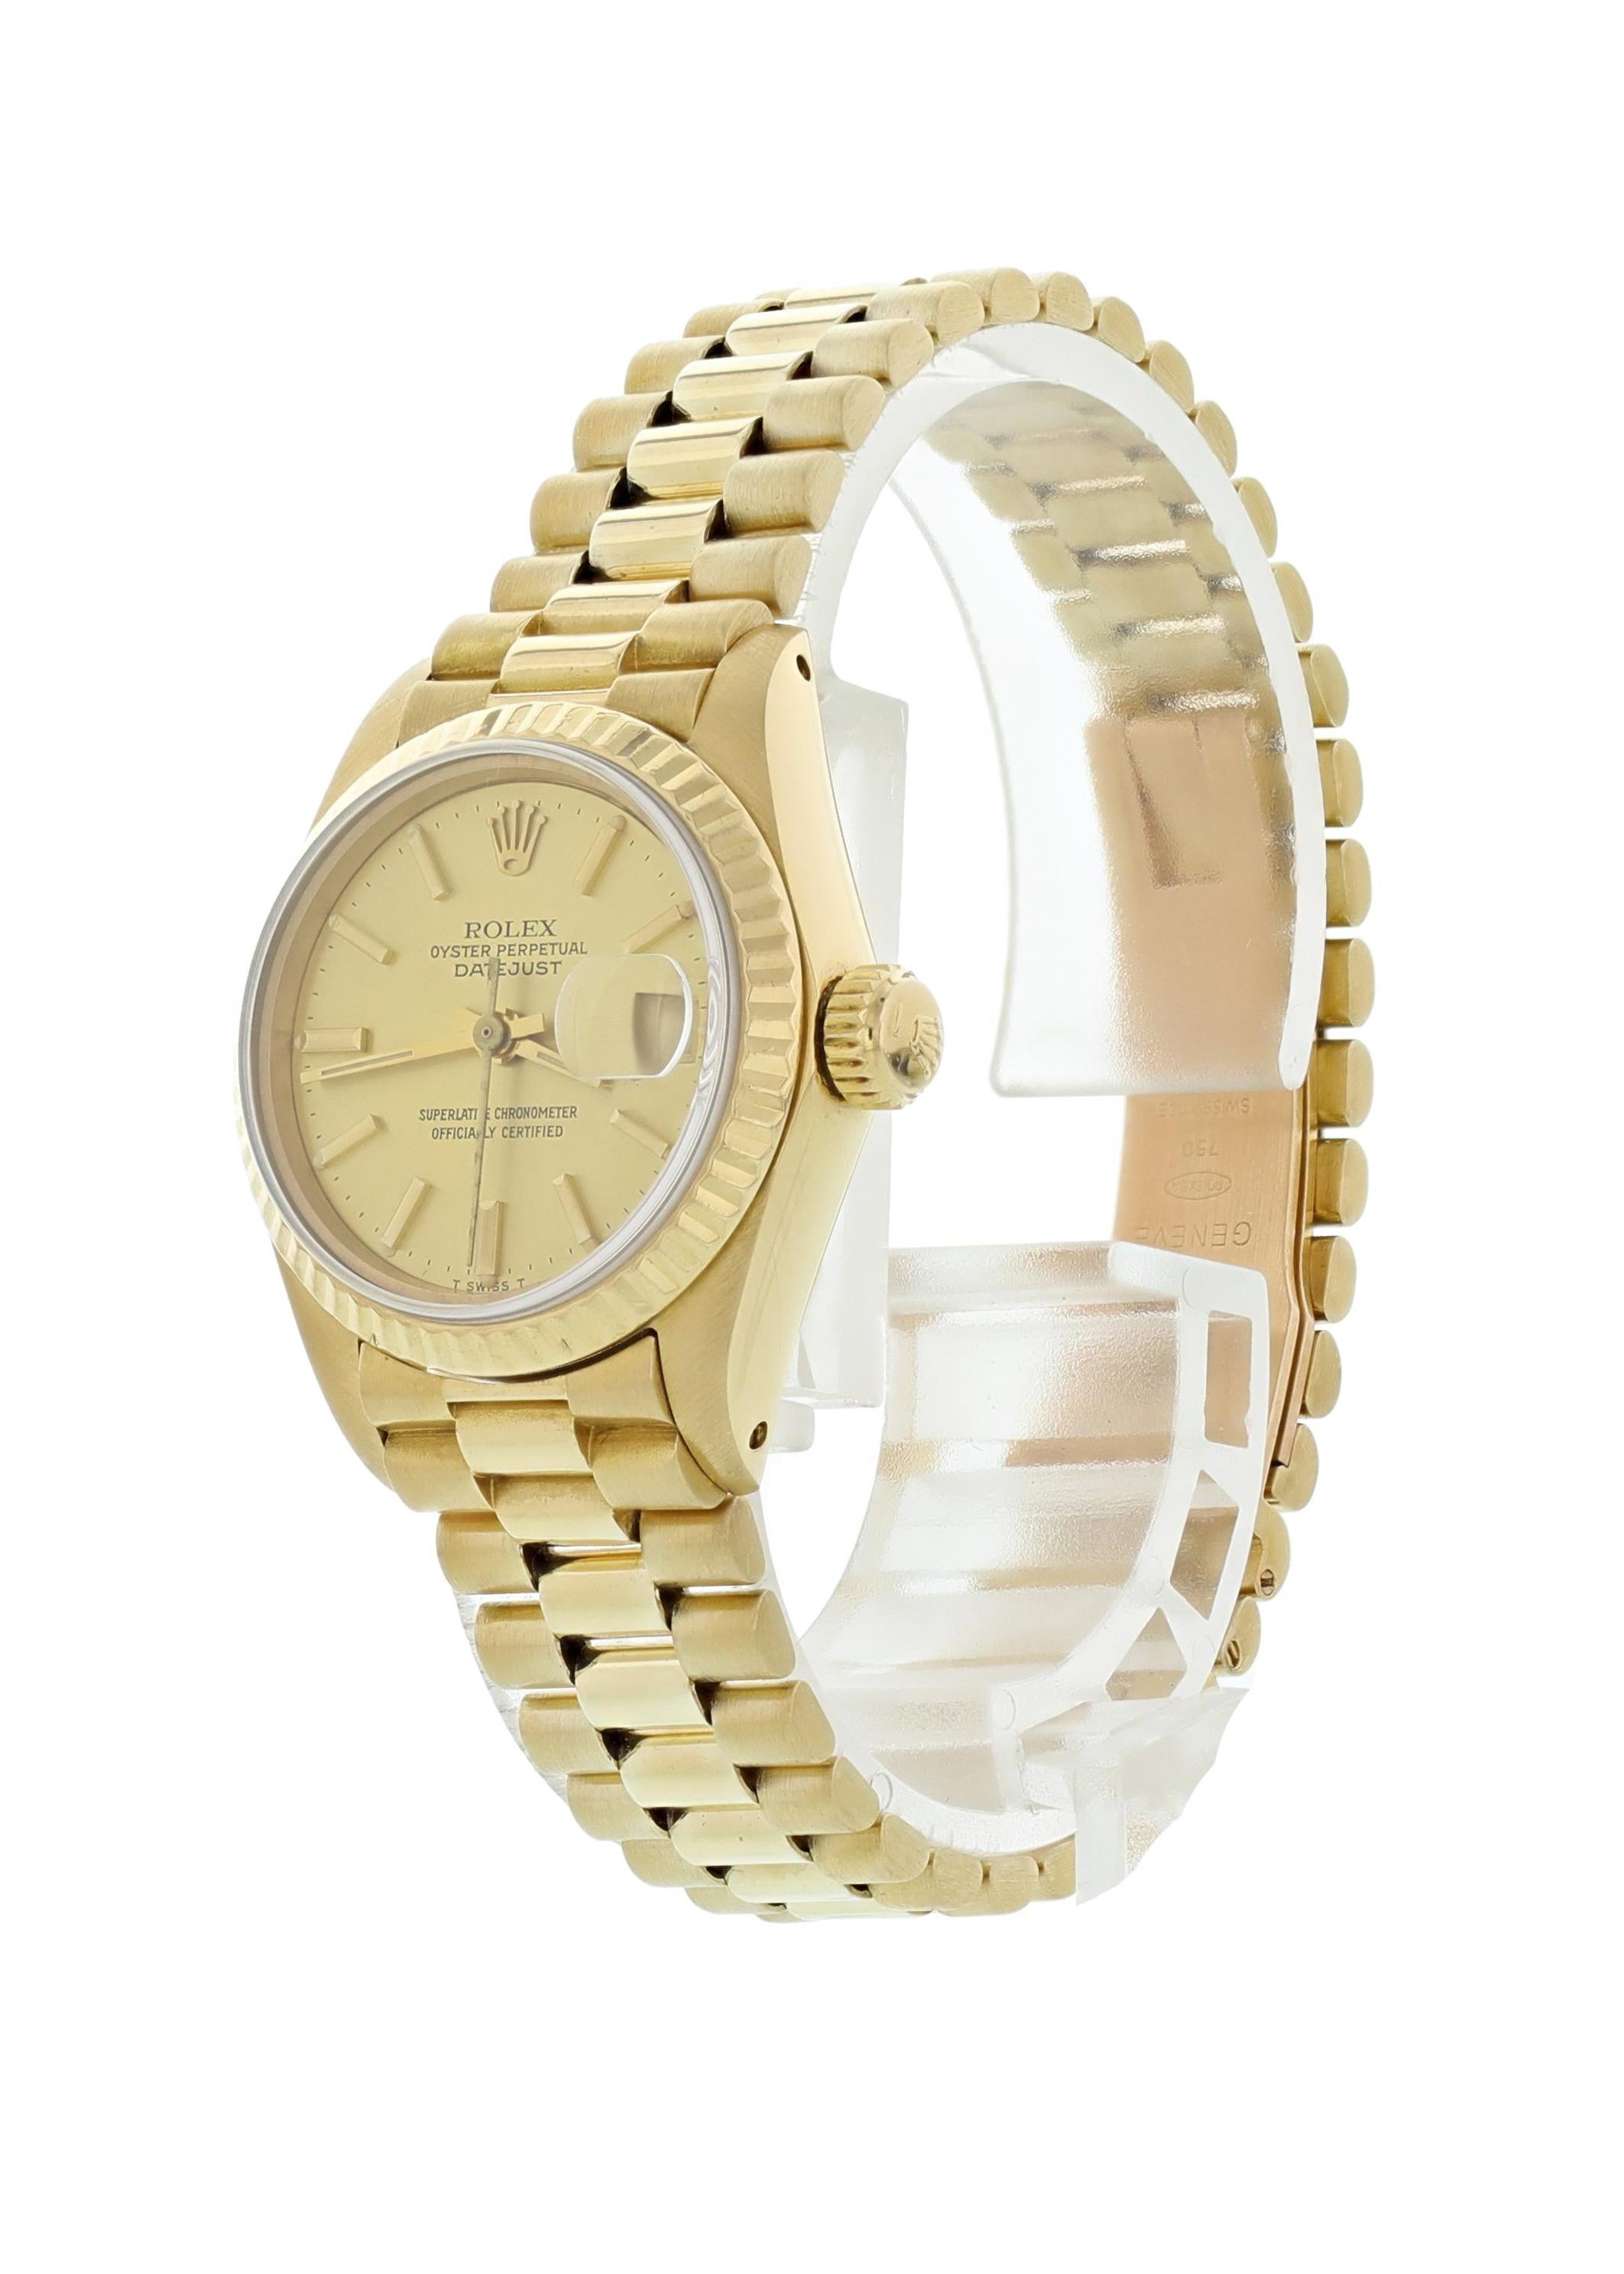 Rolex Oyster Perpetual Datejust 6917 18K Yellow Gold Ladies Watch. 26mm 18k yellow gold case and fluted bezel. Champagne dial with gold hands and indexes. Date aperture. 18K yellow gold Jubilee band with a hidden fold-over clasp. Will fit up to a